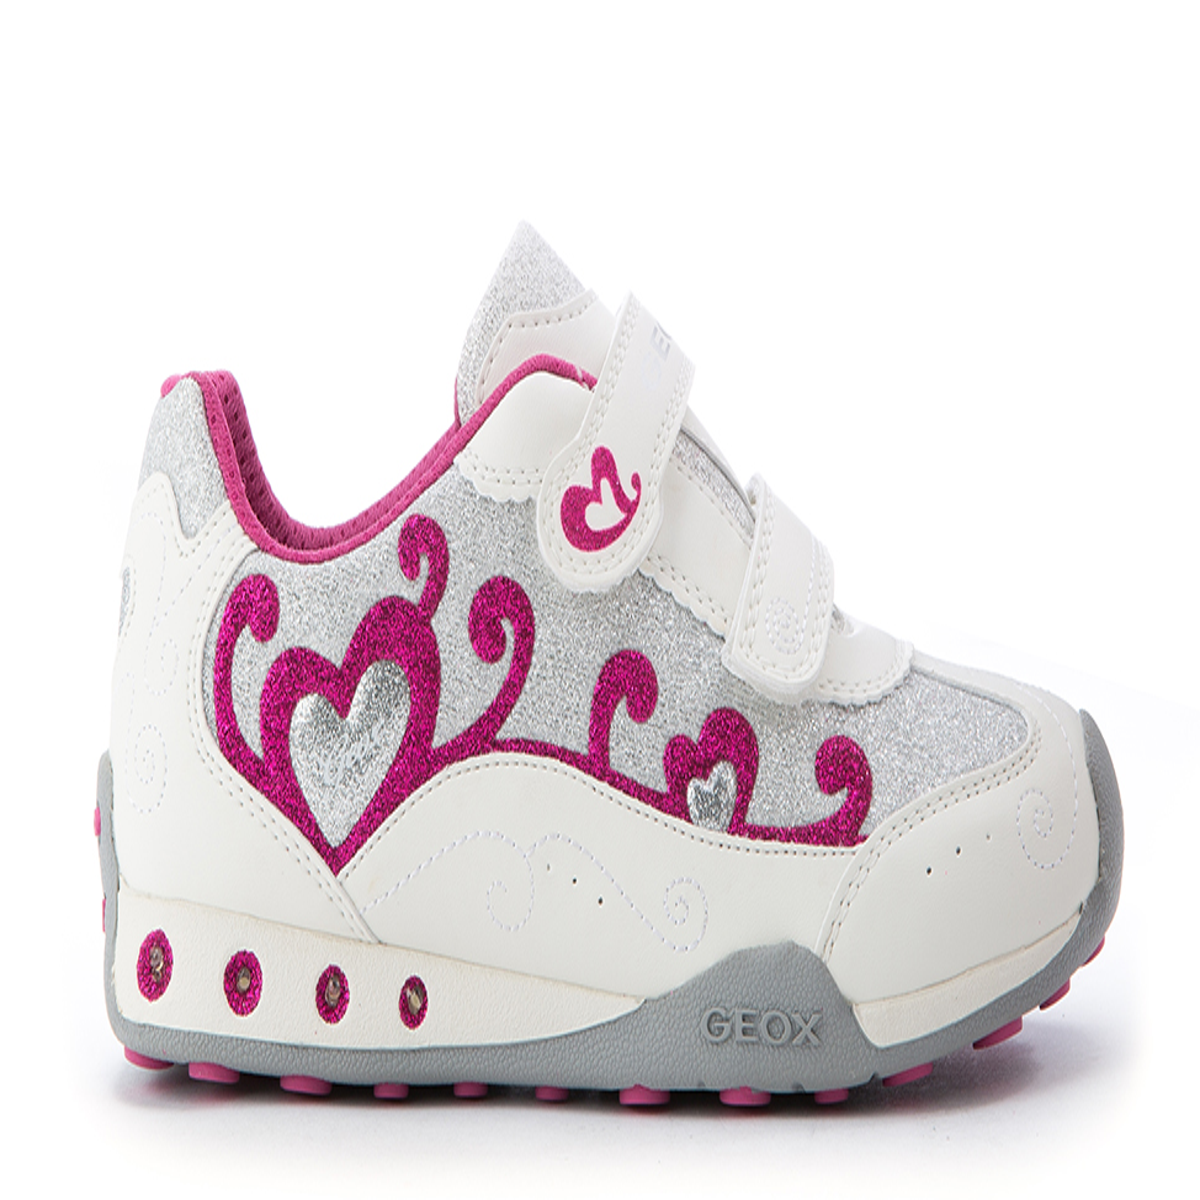 shoes for whole family from Geox The Independent | The Independent